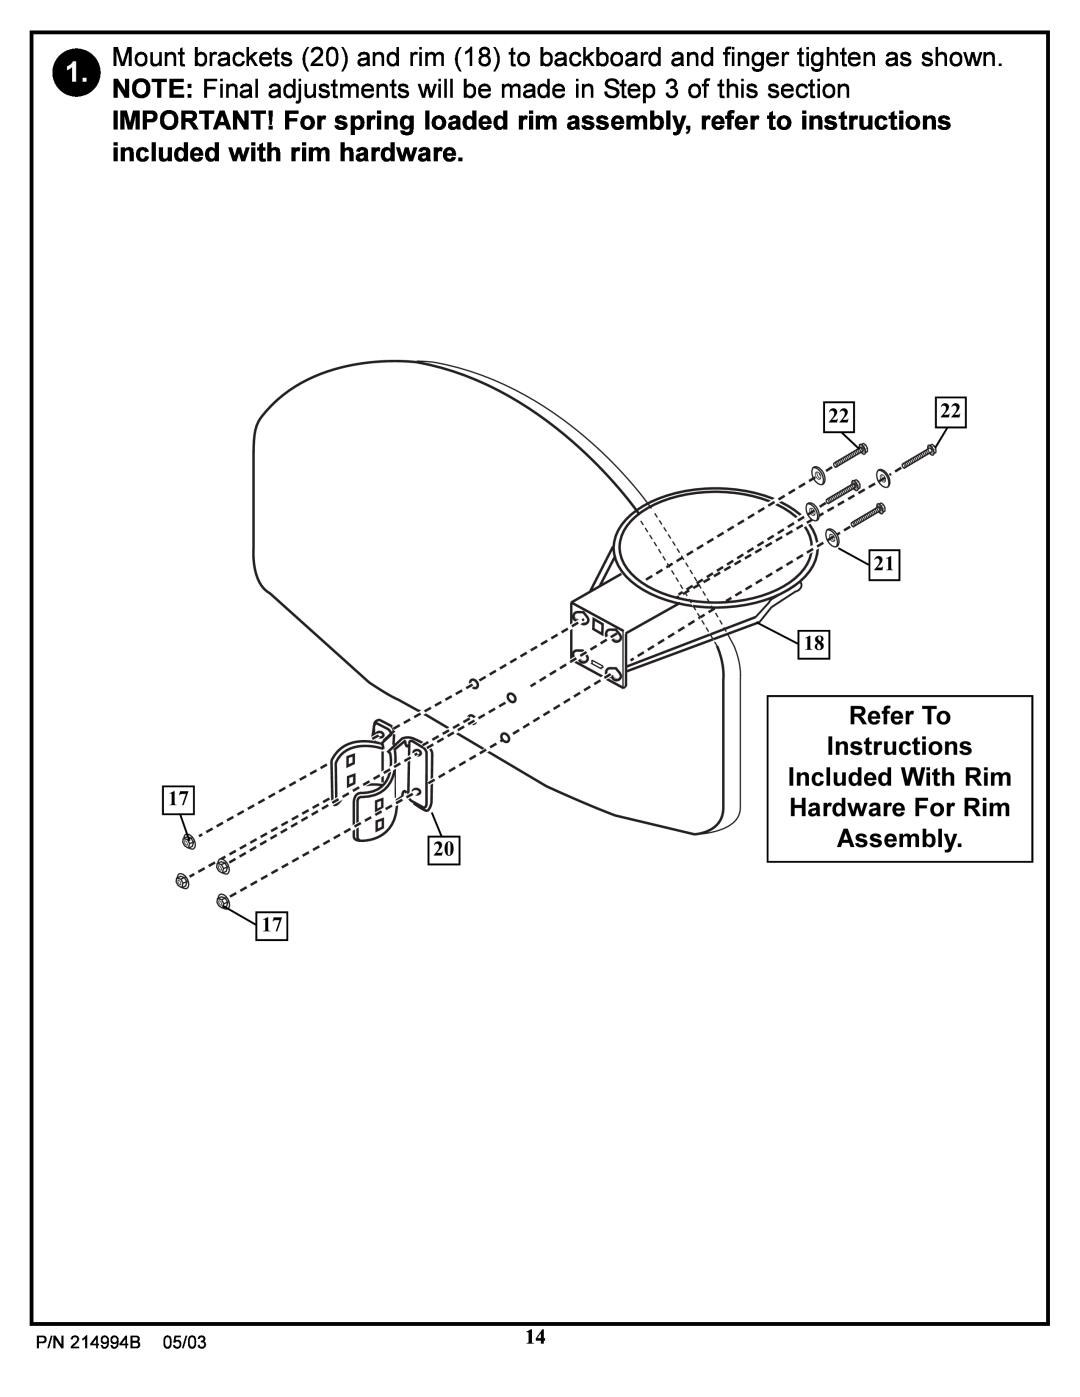 Spalding 214994B manual Refer To Instructions Included With Rim Hardware For Rim Assembly 